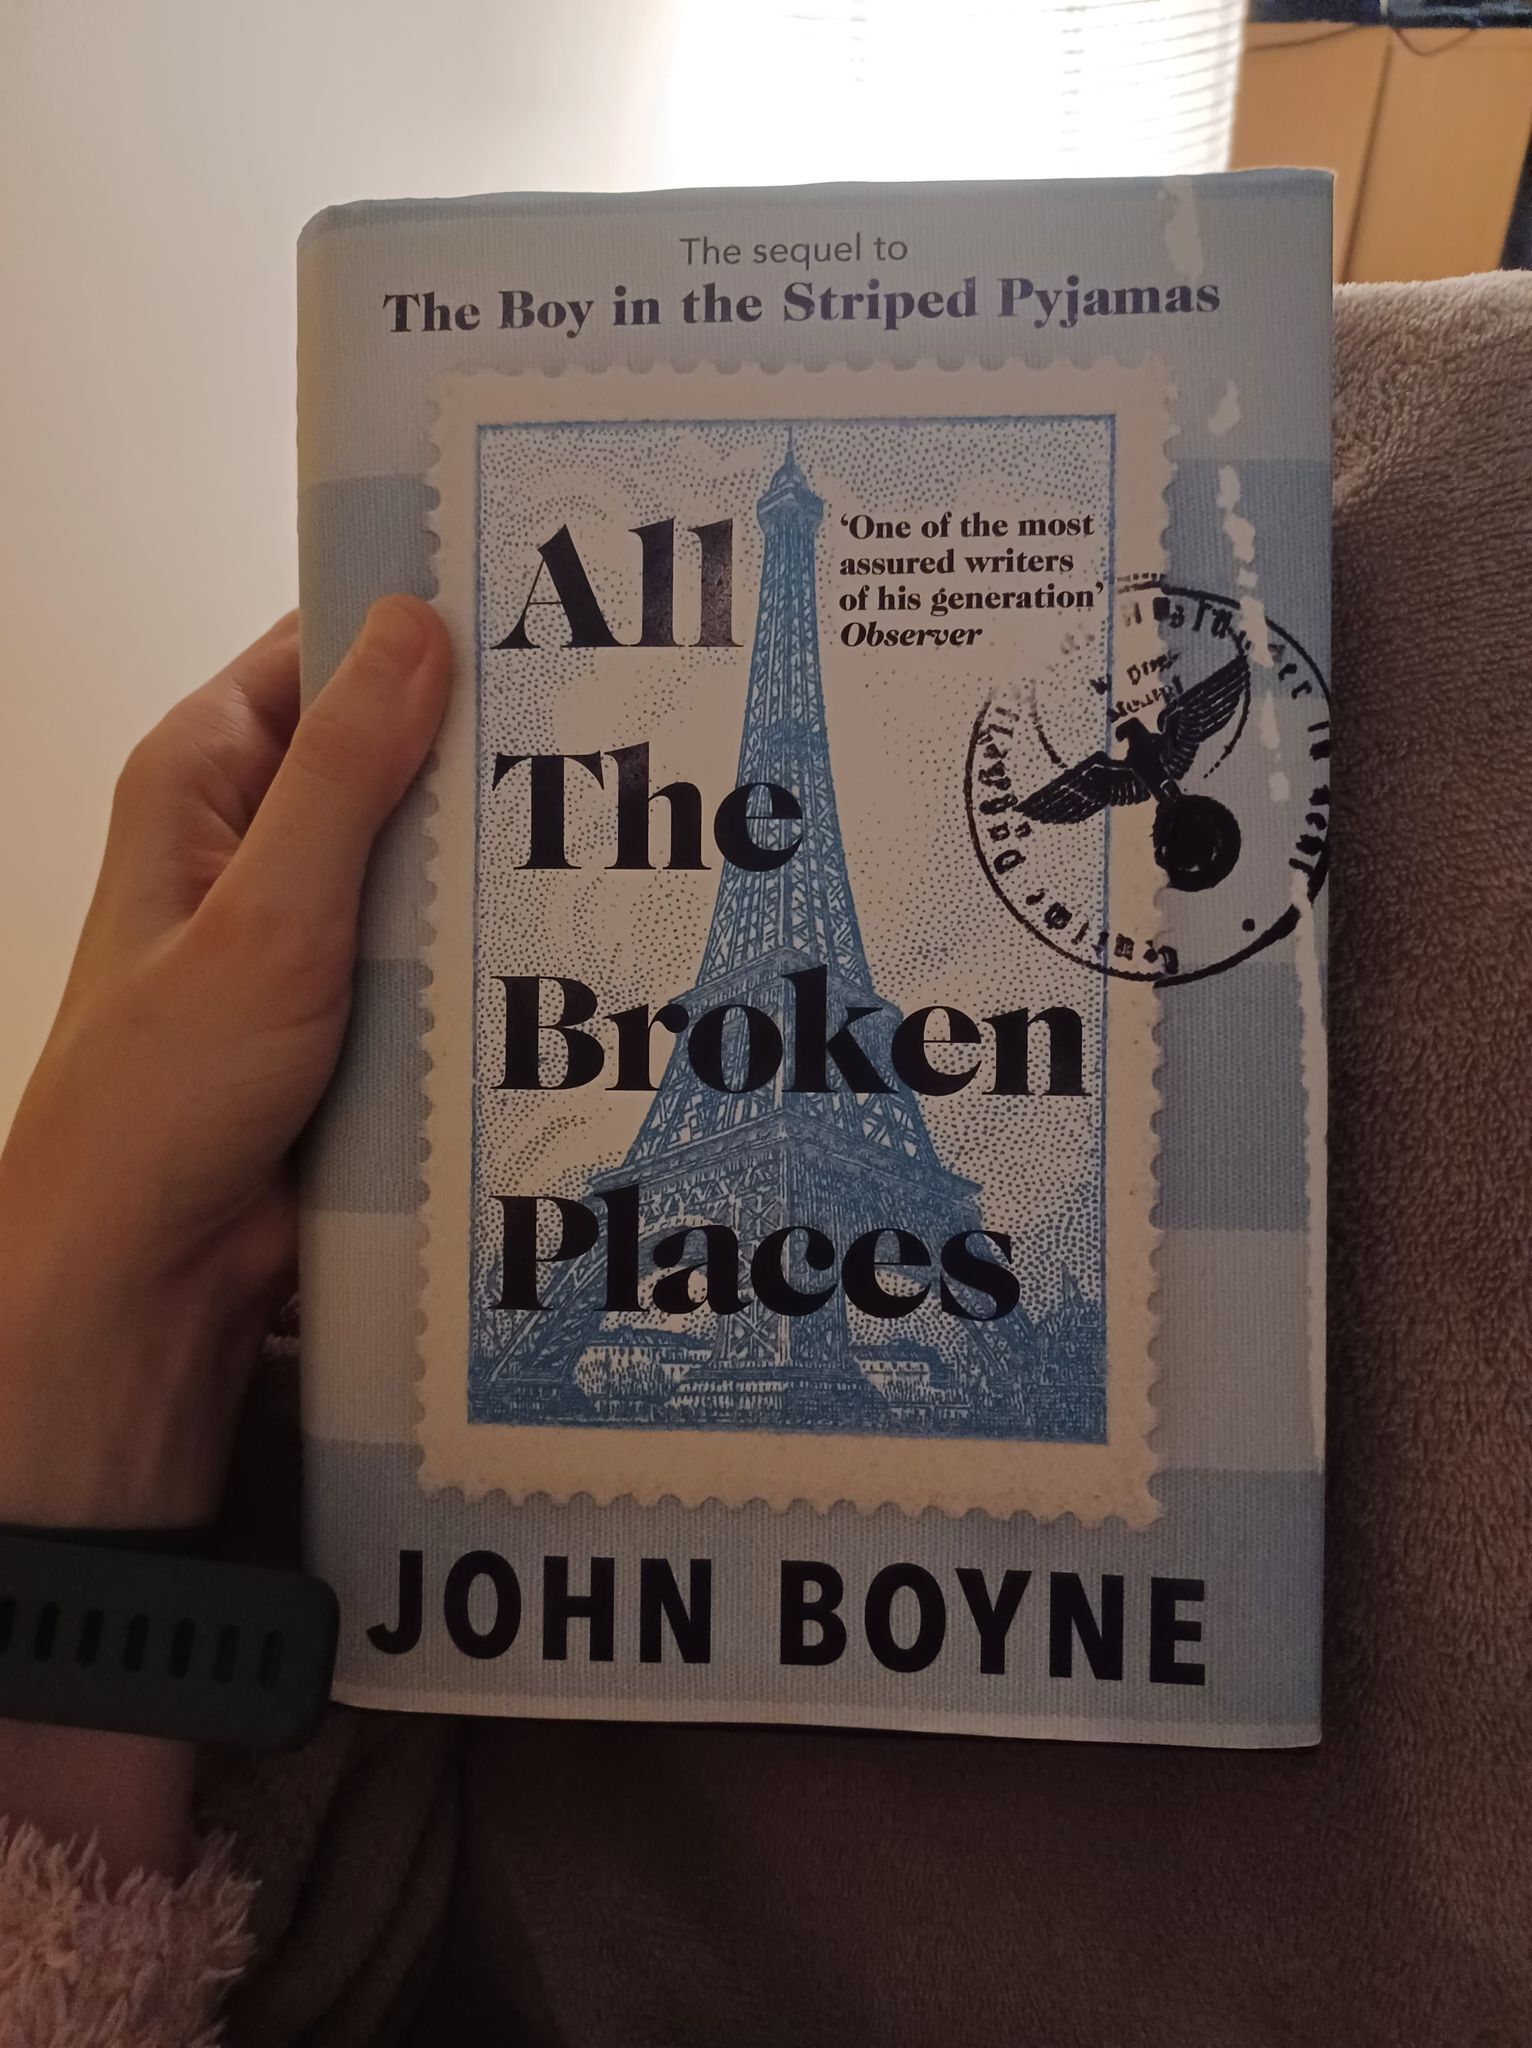 All the broken places